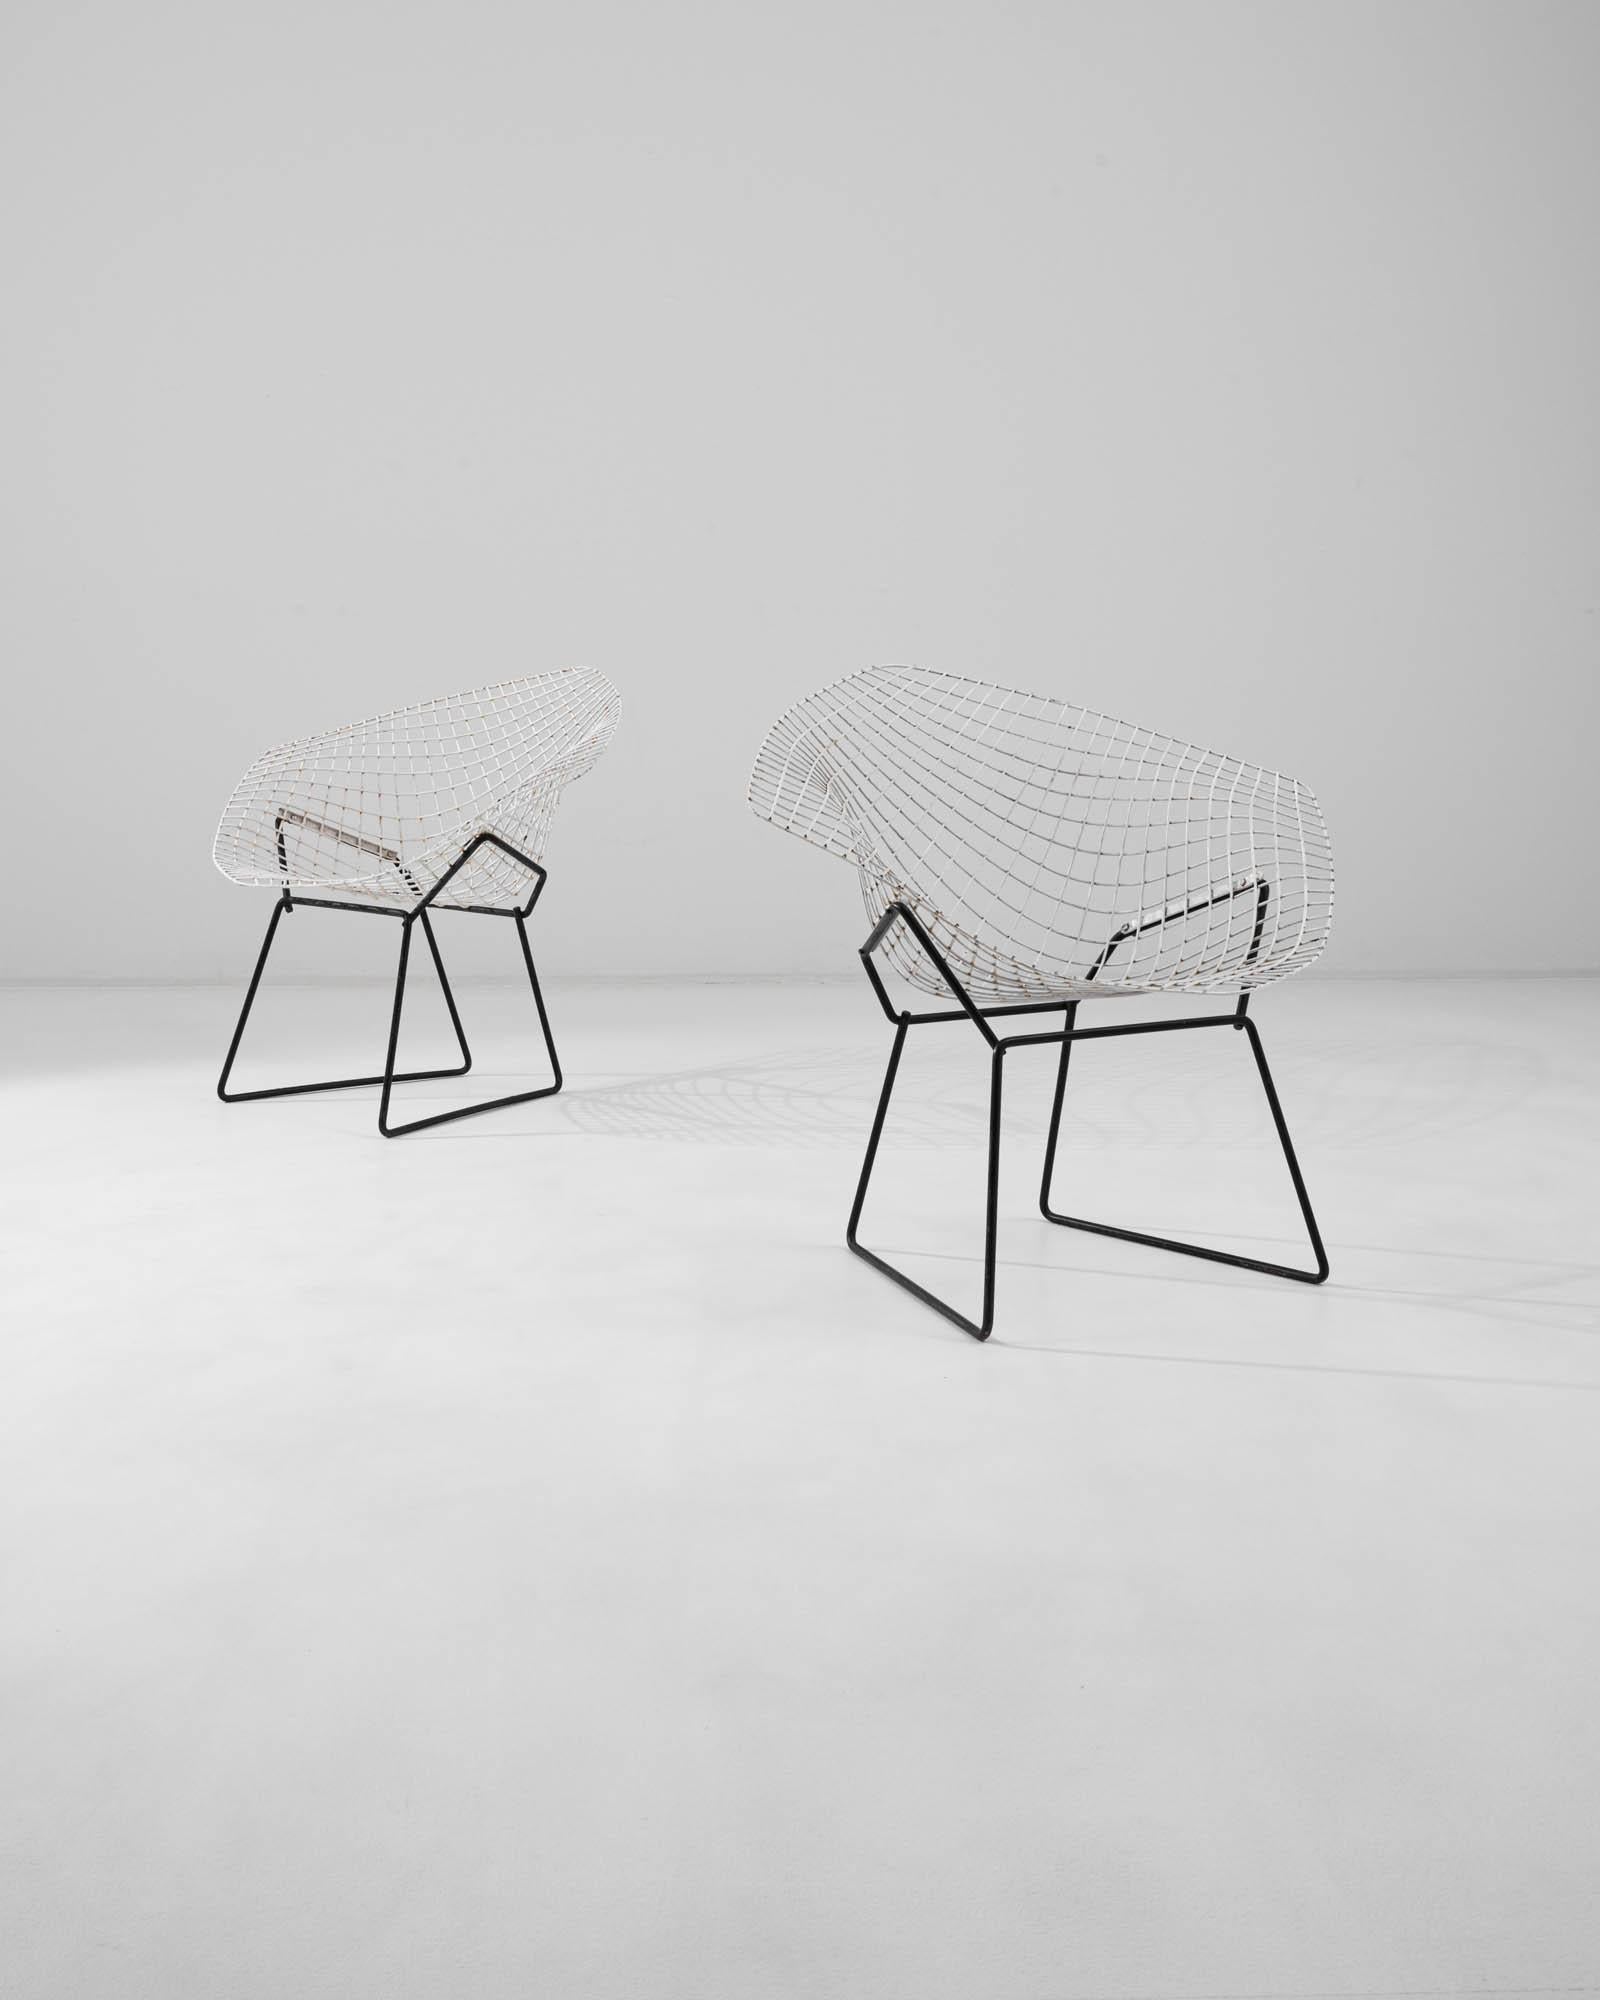 A pair of 20th century Italian metal chairs created by Harry Bertoia. Referred to as ‘diamond chairs,’ these classic mid-century chairs exude a spectacular sculptural sensibility and ergonomic harmony. The flowing metal grid that composes the seat,